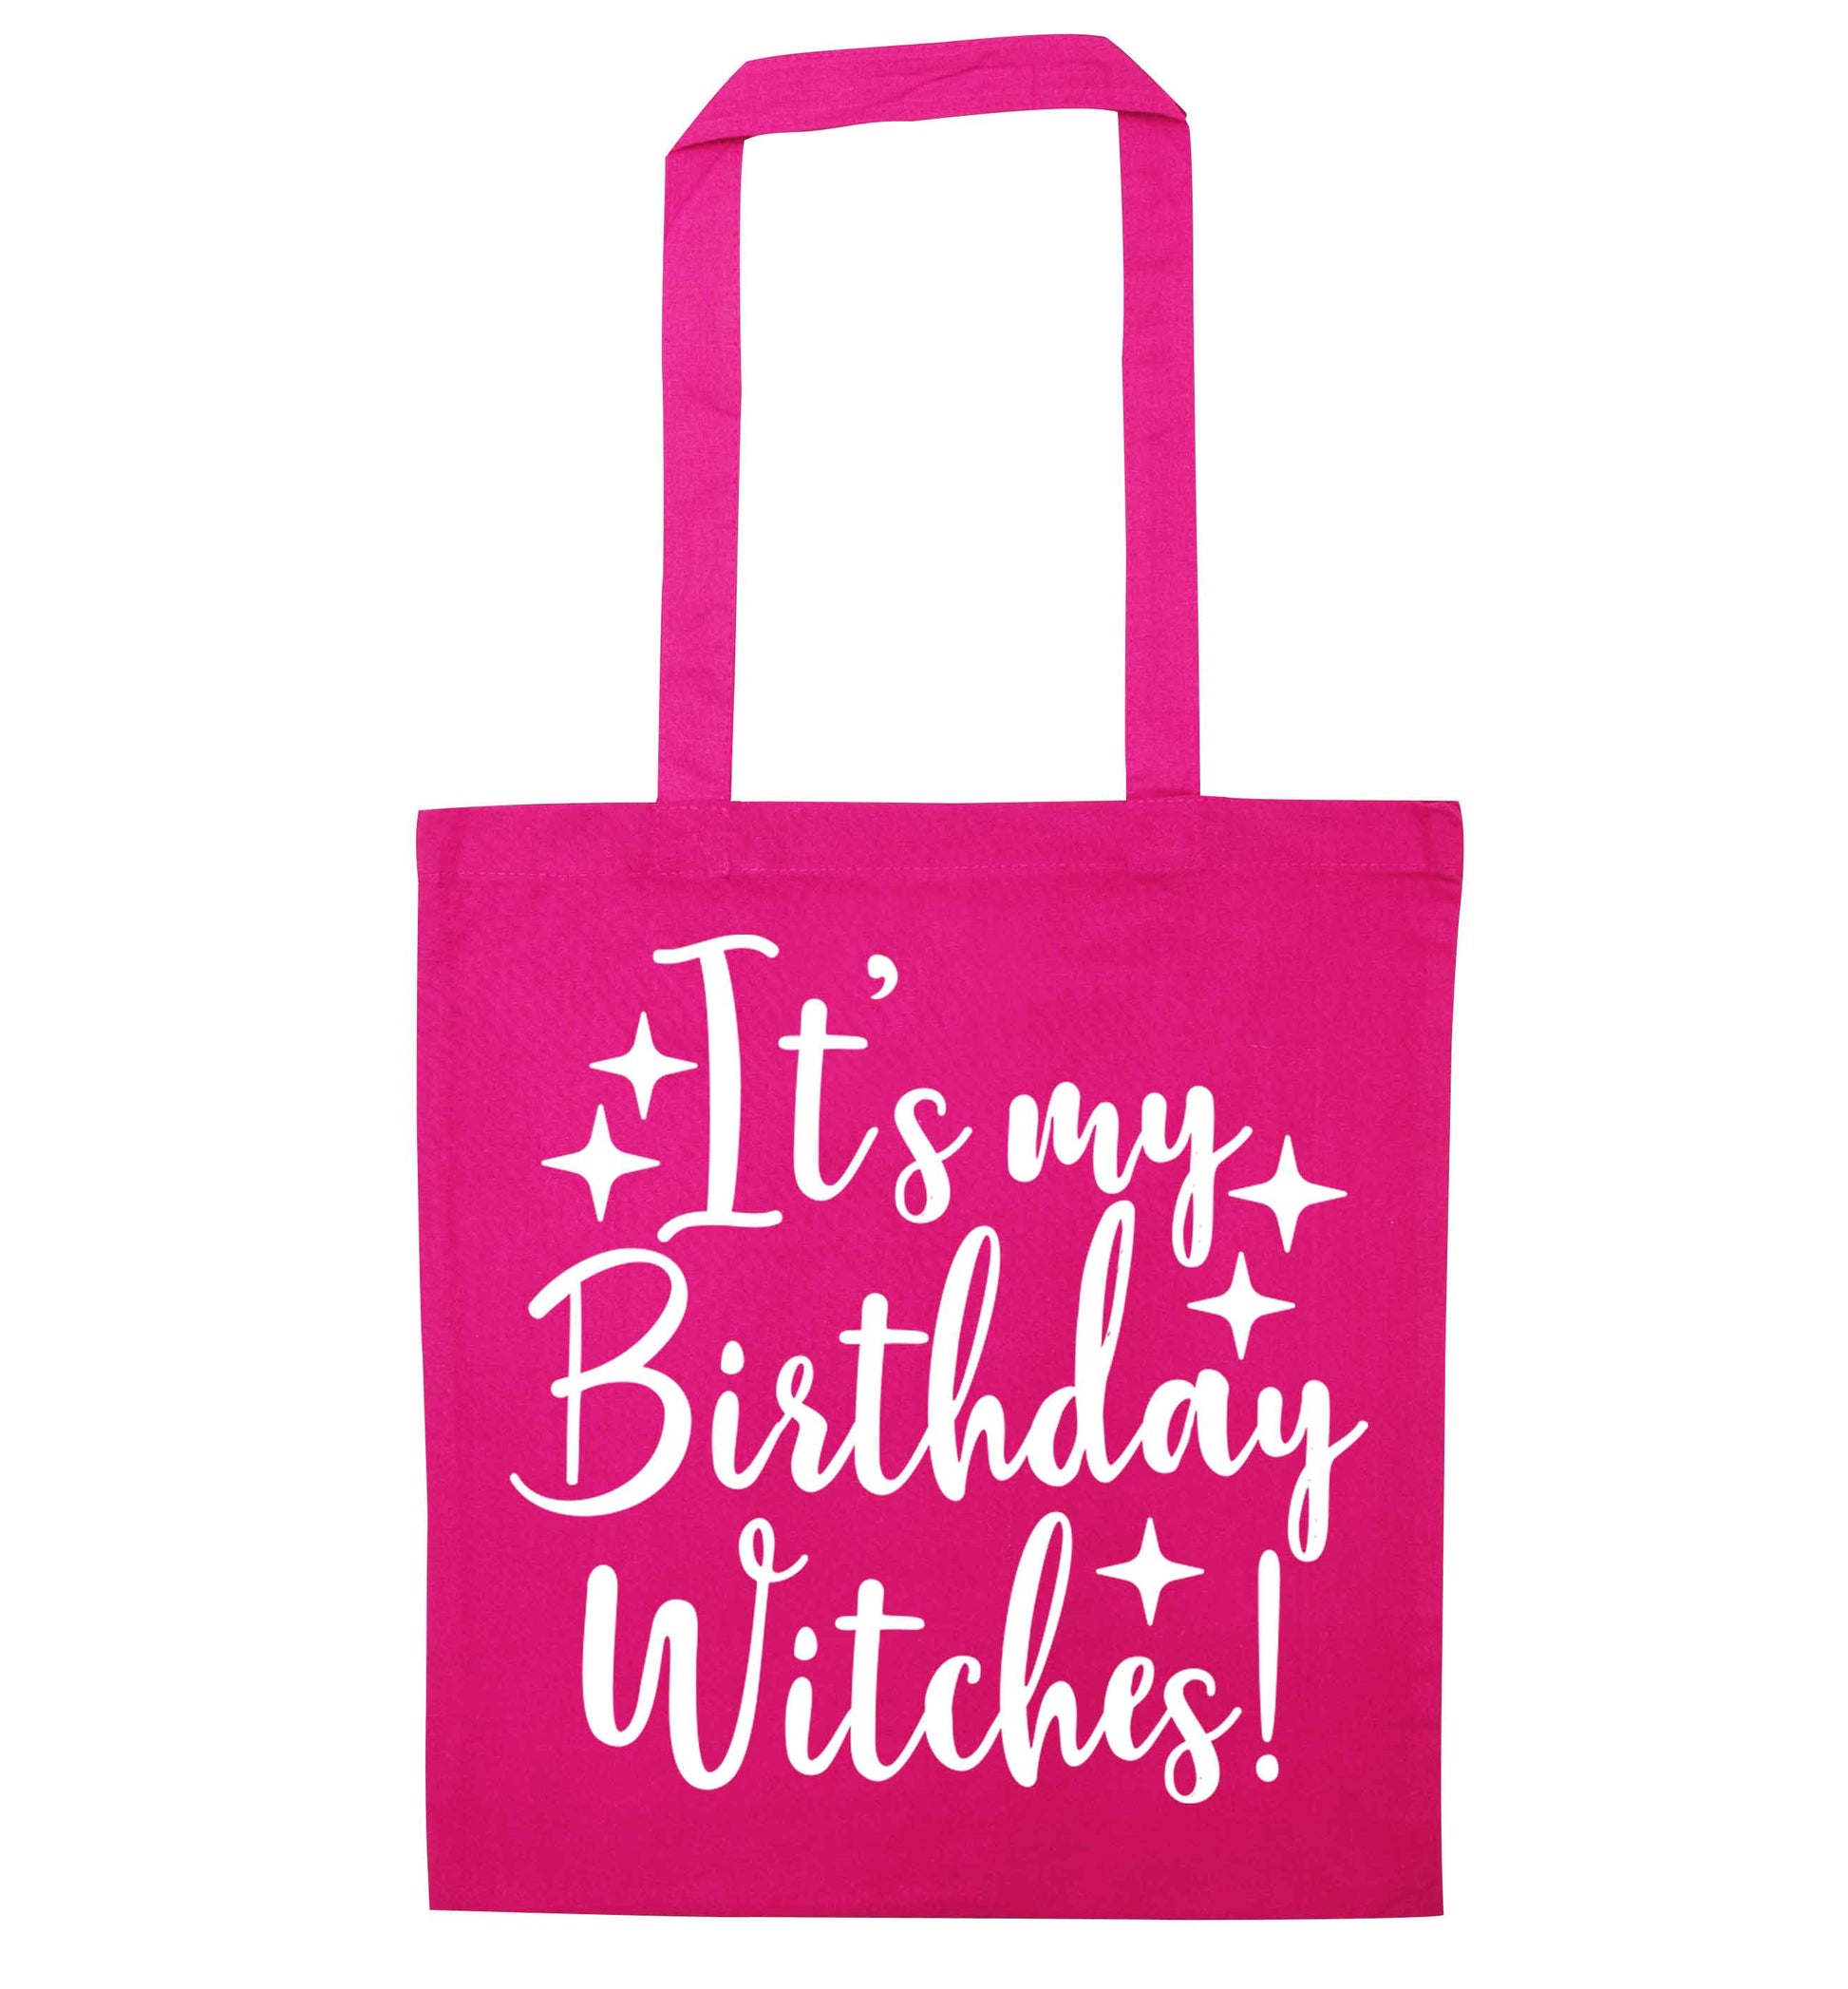 It's my birthday witches!pink tote bag